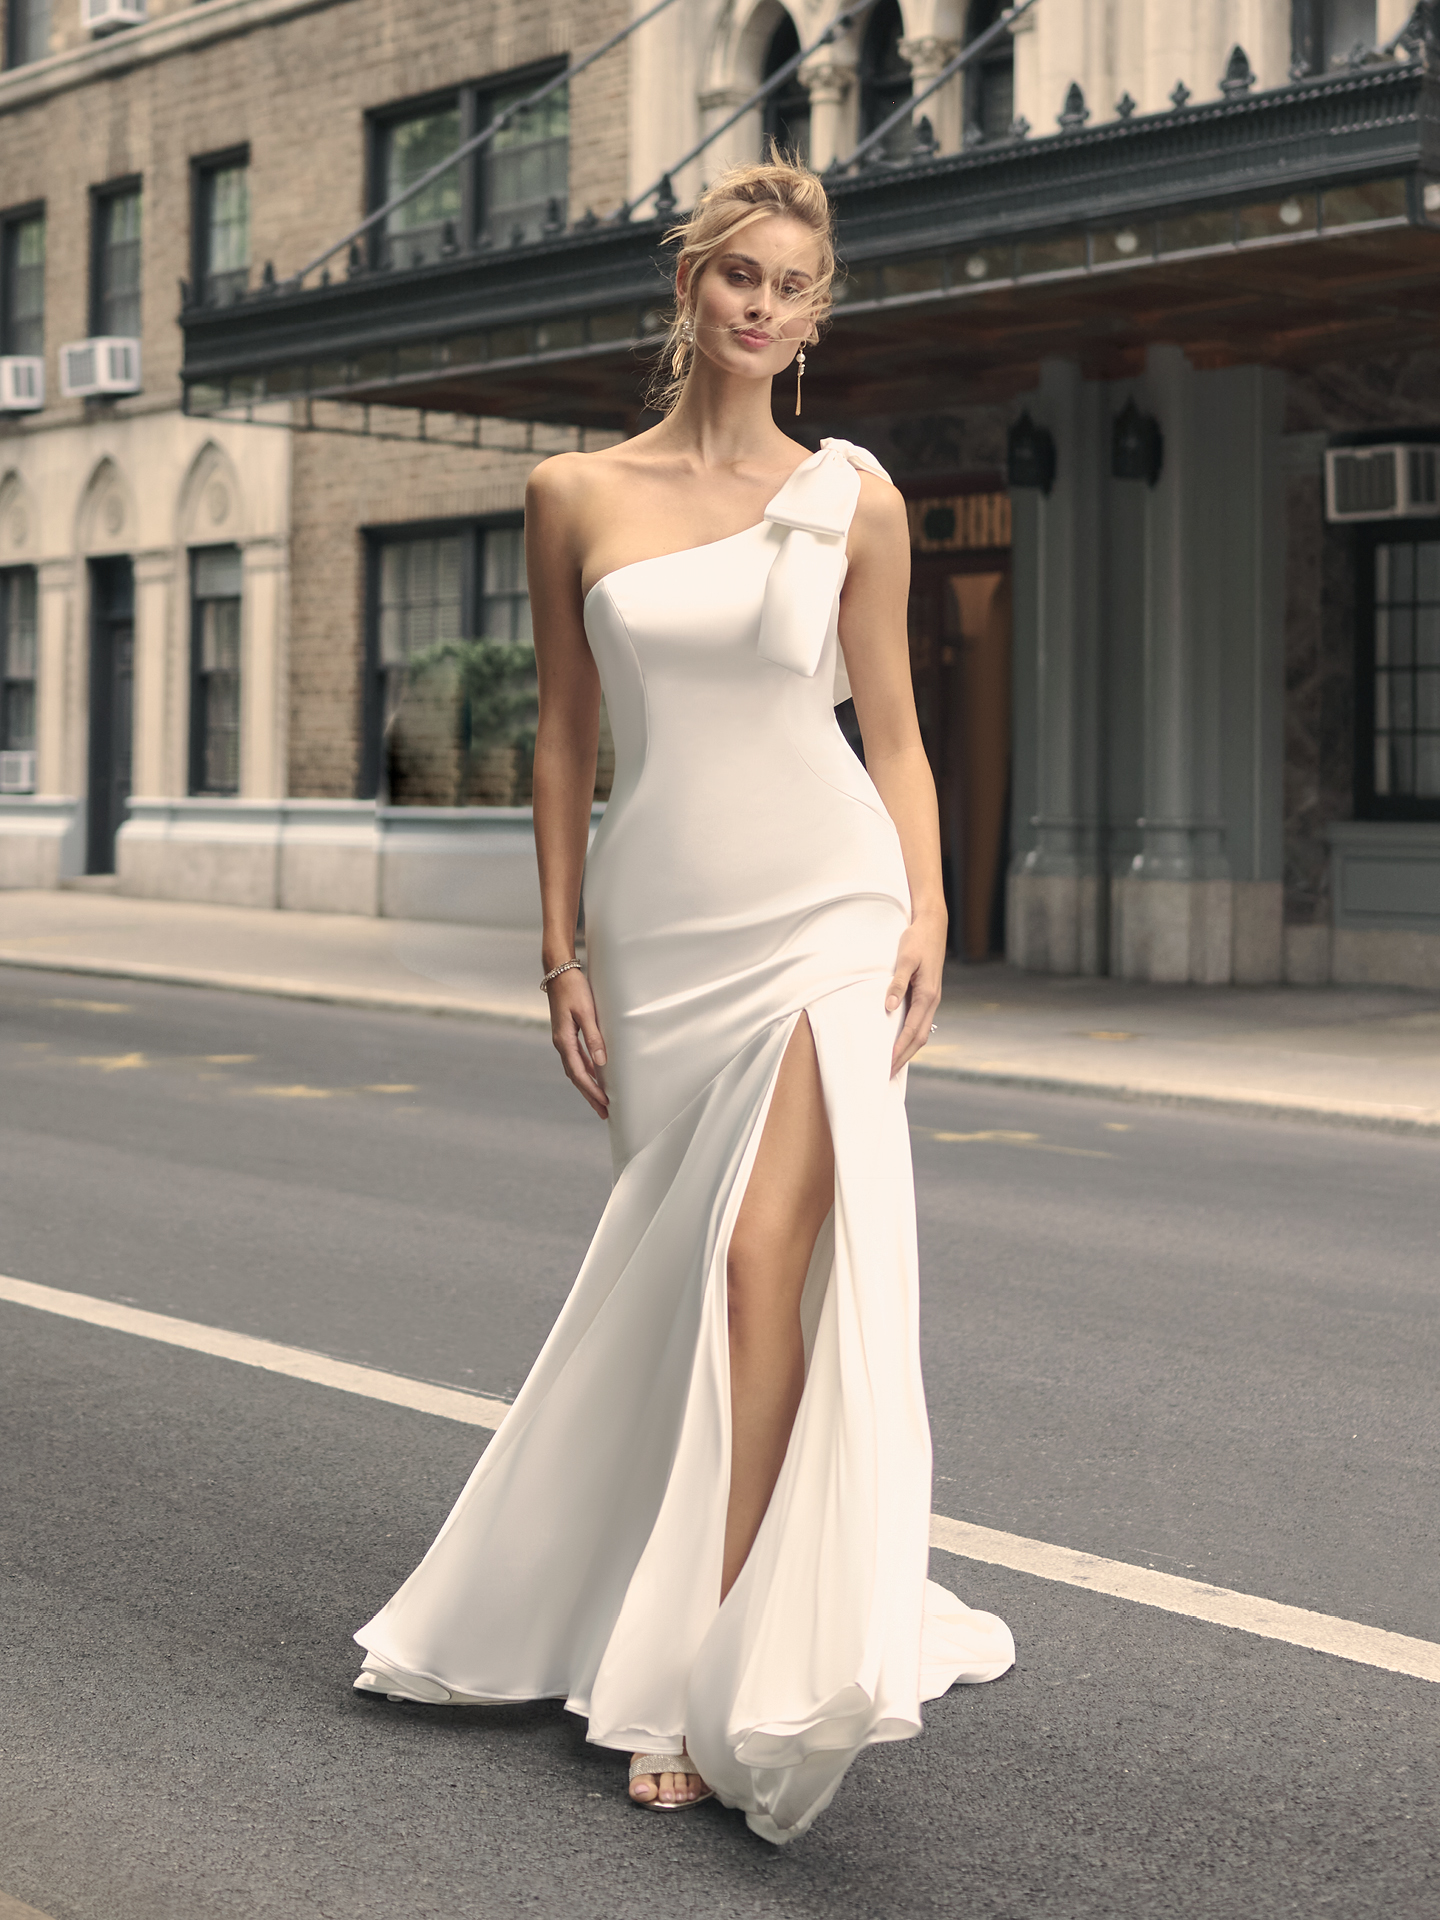 Bride In Asymmetrical Wedding Dress Called Saratoga By Maggie Sottero